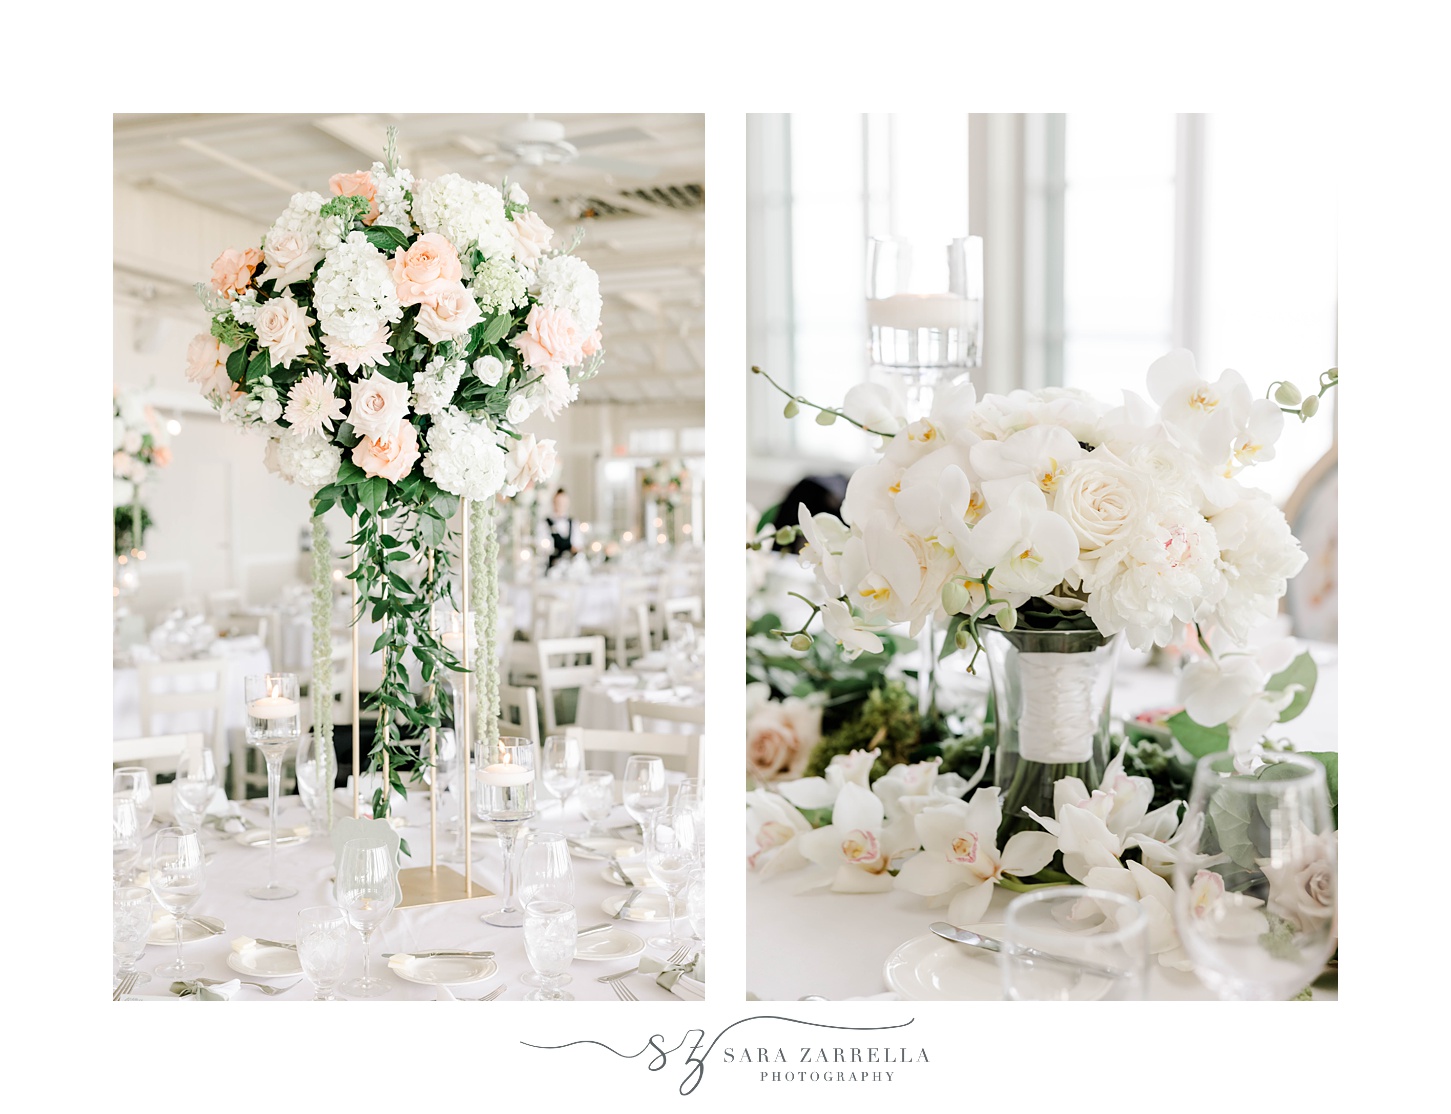 wedding reception with pink and white flowers for centerpieces 